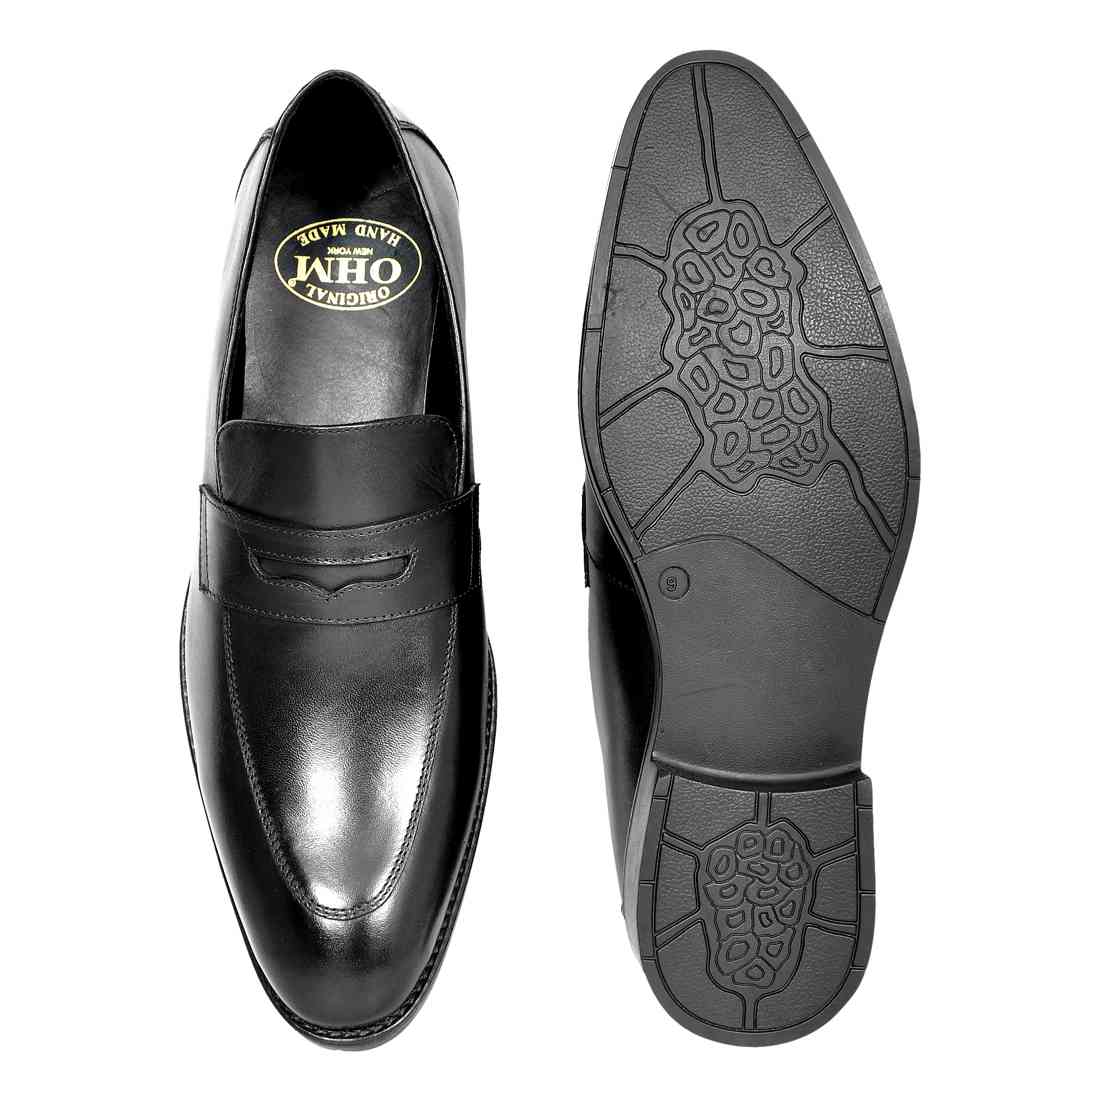 OHM New York Double Stitched Penny Loafer Leather Shoes